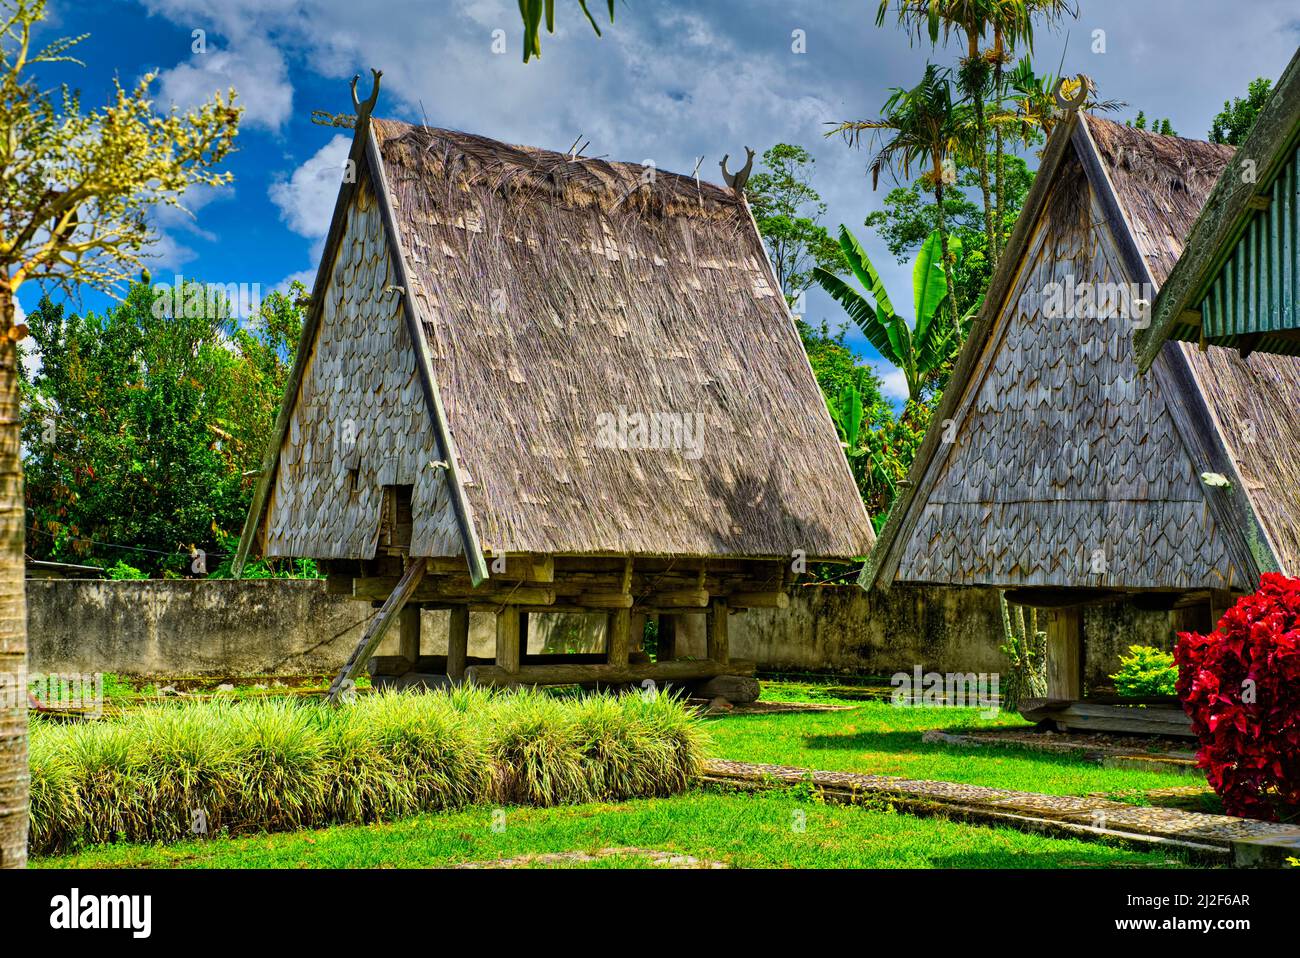 Rumah Tambi is a traditional house from Tampo Lore, Poso Regency, Central Sulawesi province, Indonesia. This traditional stilts house in the form of a Stock Photo